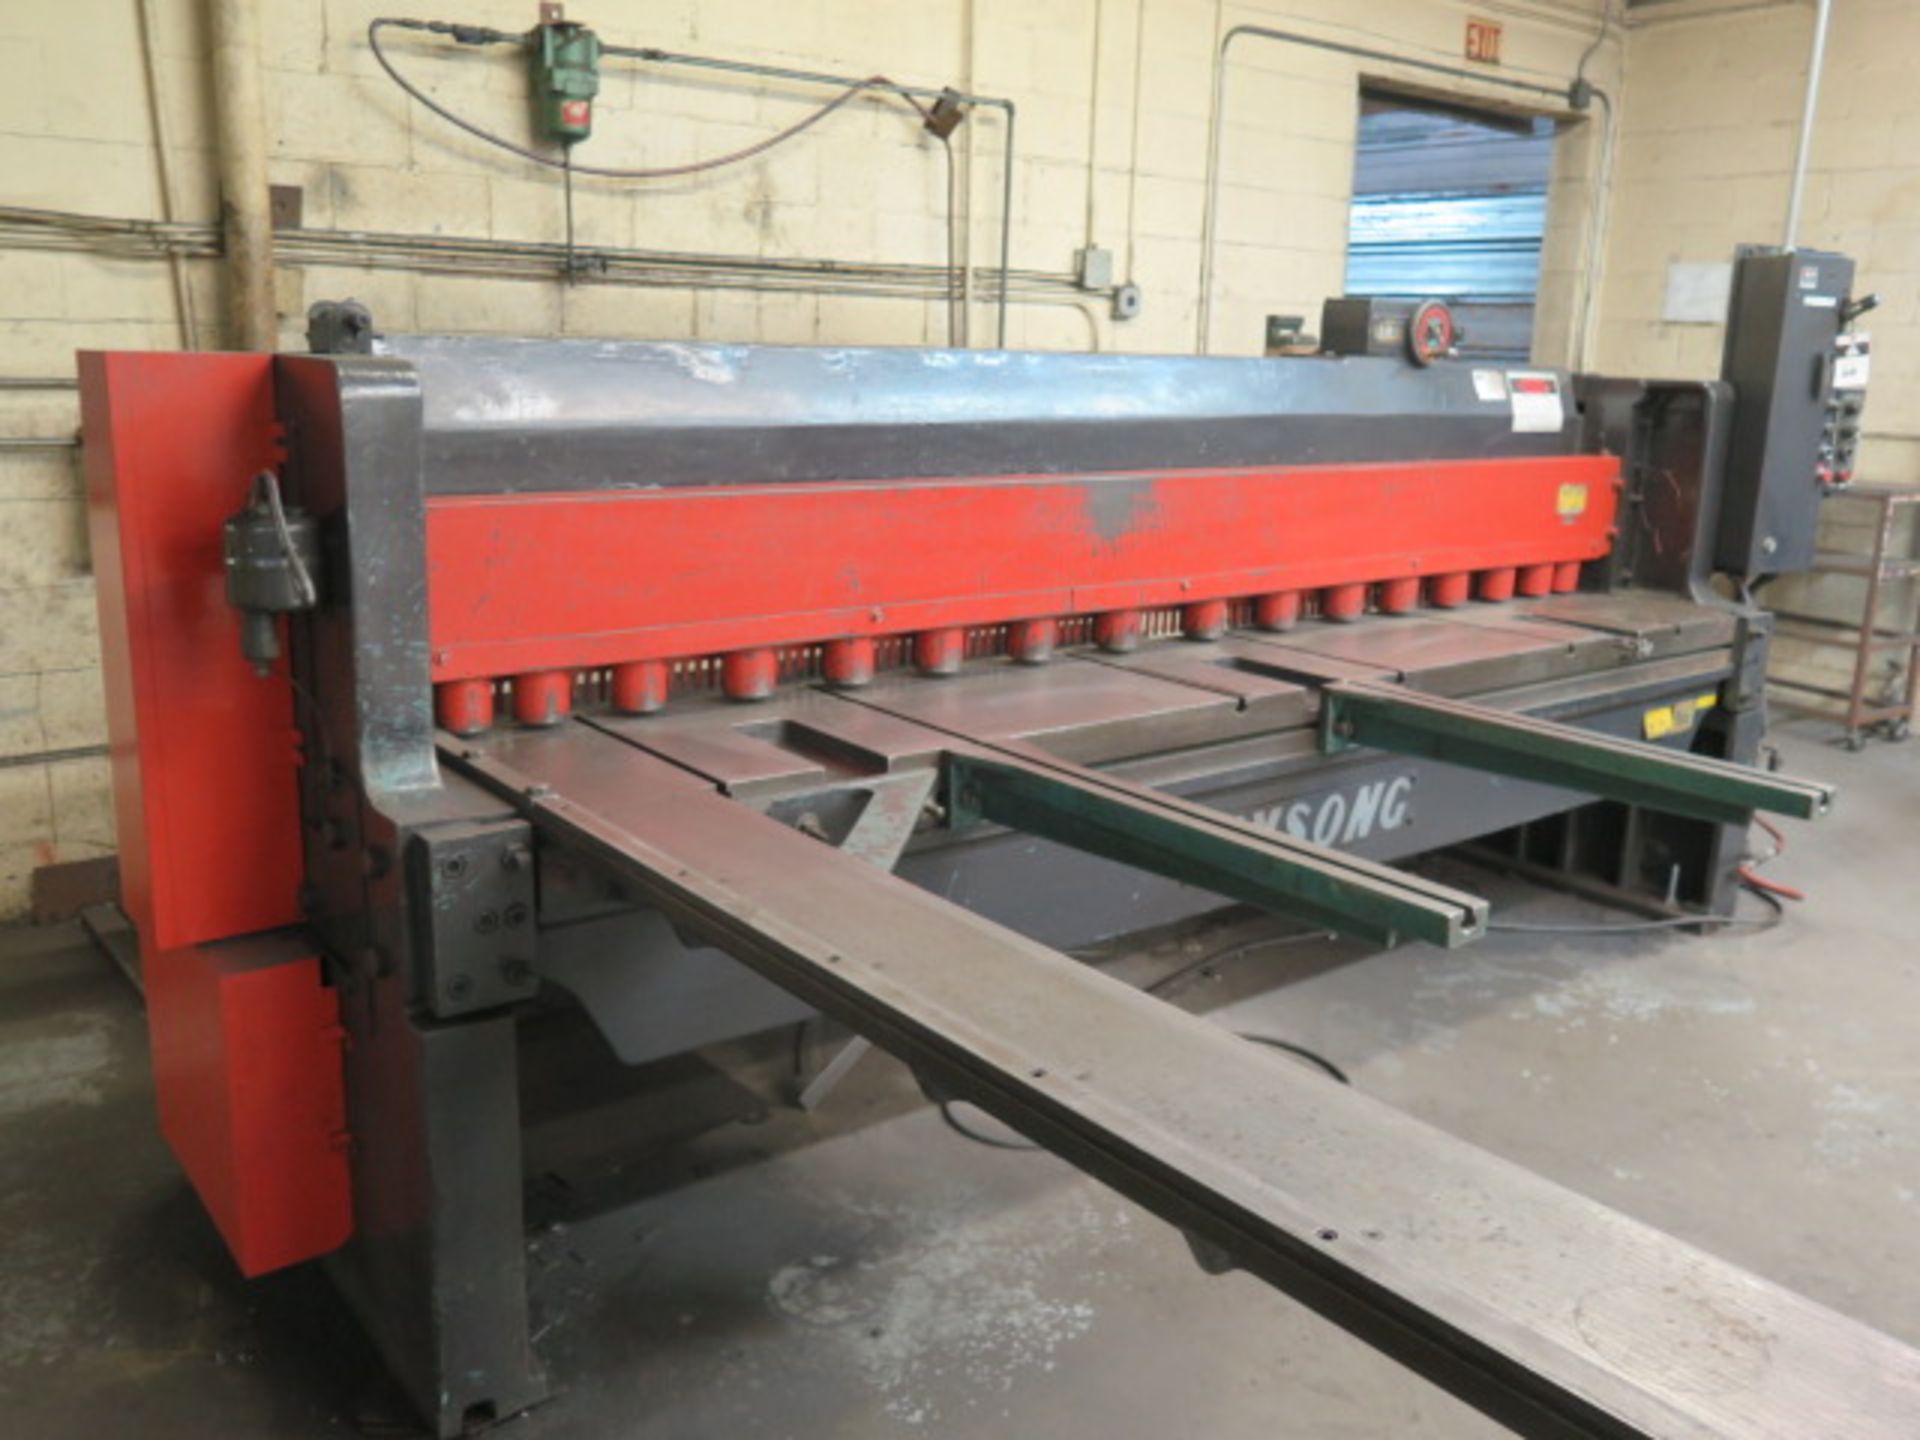 Wysong mdl. 1010 10GA (3/16”) x 10’ Power Shear s/n P32-1540 w/ Dial Power Backgauge, SOLD AS IS - Image 3 of 10